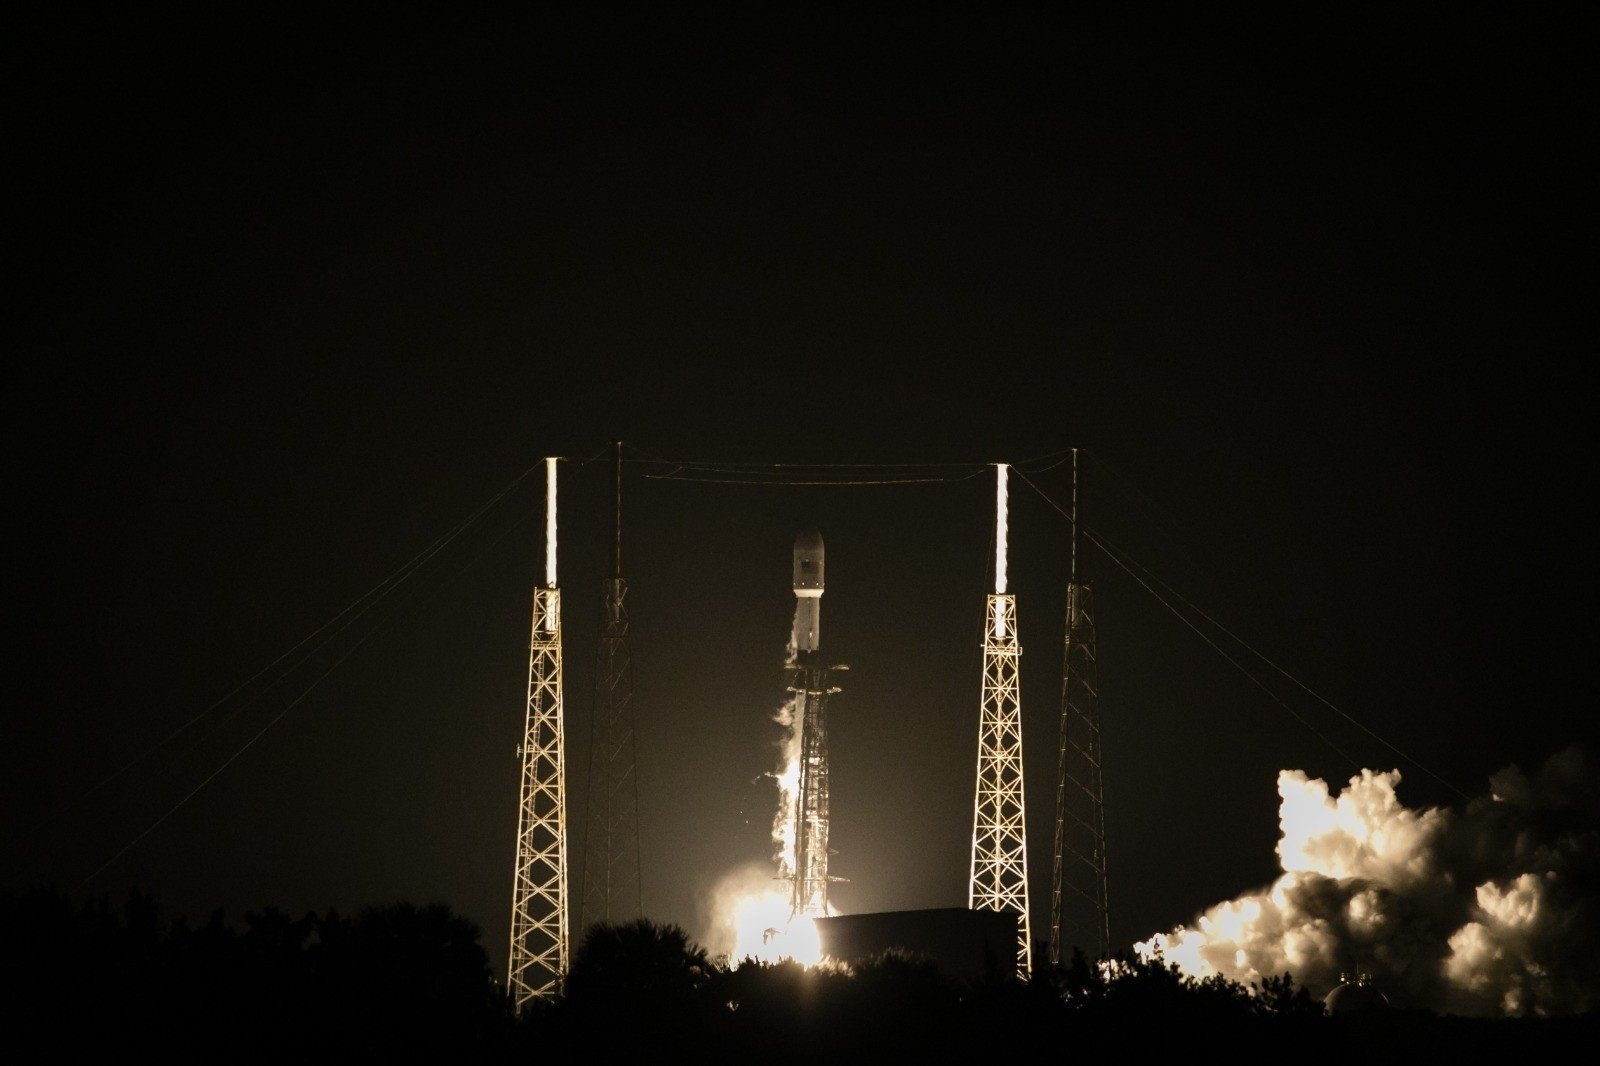 Turkey's new Türksat 5A satellite, carried by a SpaceX Falcon 9 rocket, launches from Cape Canaveral Space Force Station, in Cape Canaveral, Florida, U.S., Jan. 7, 2020. (IHA Photo)